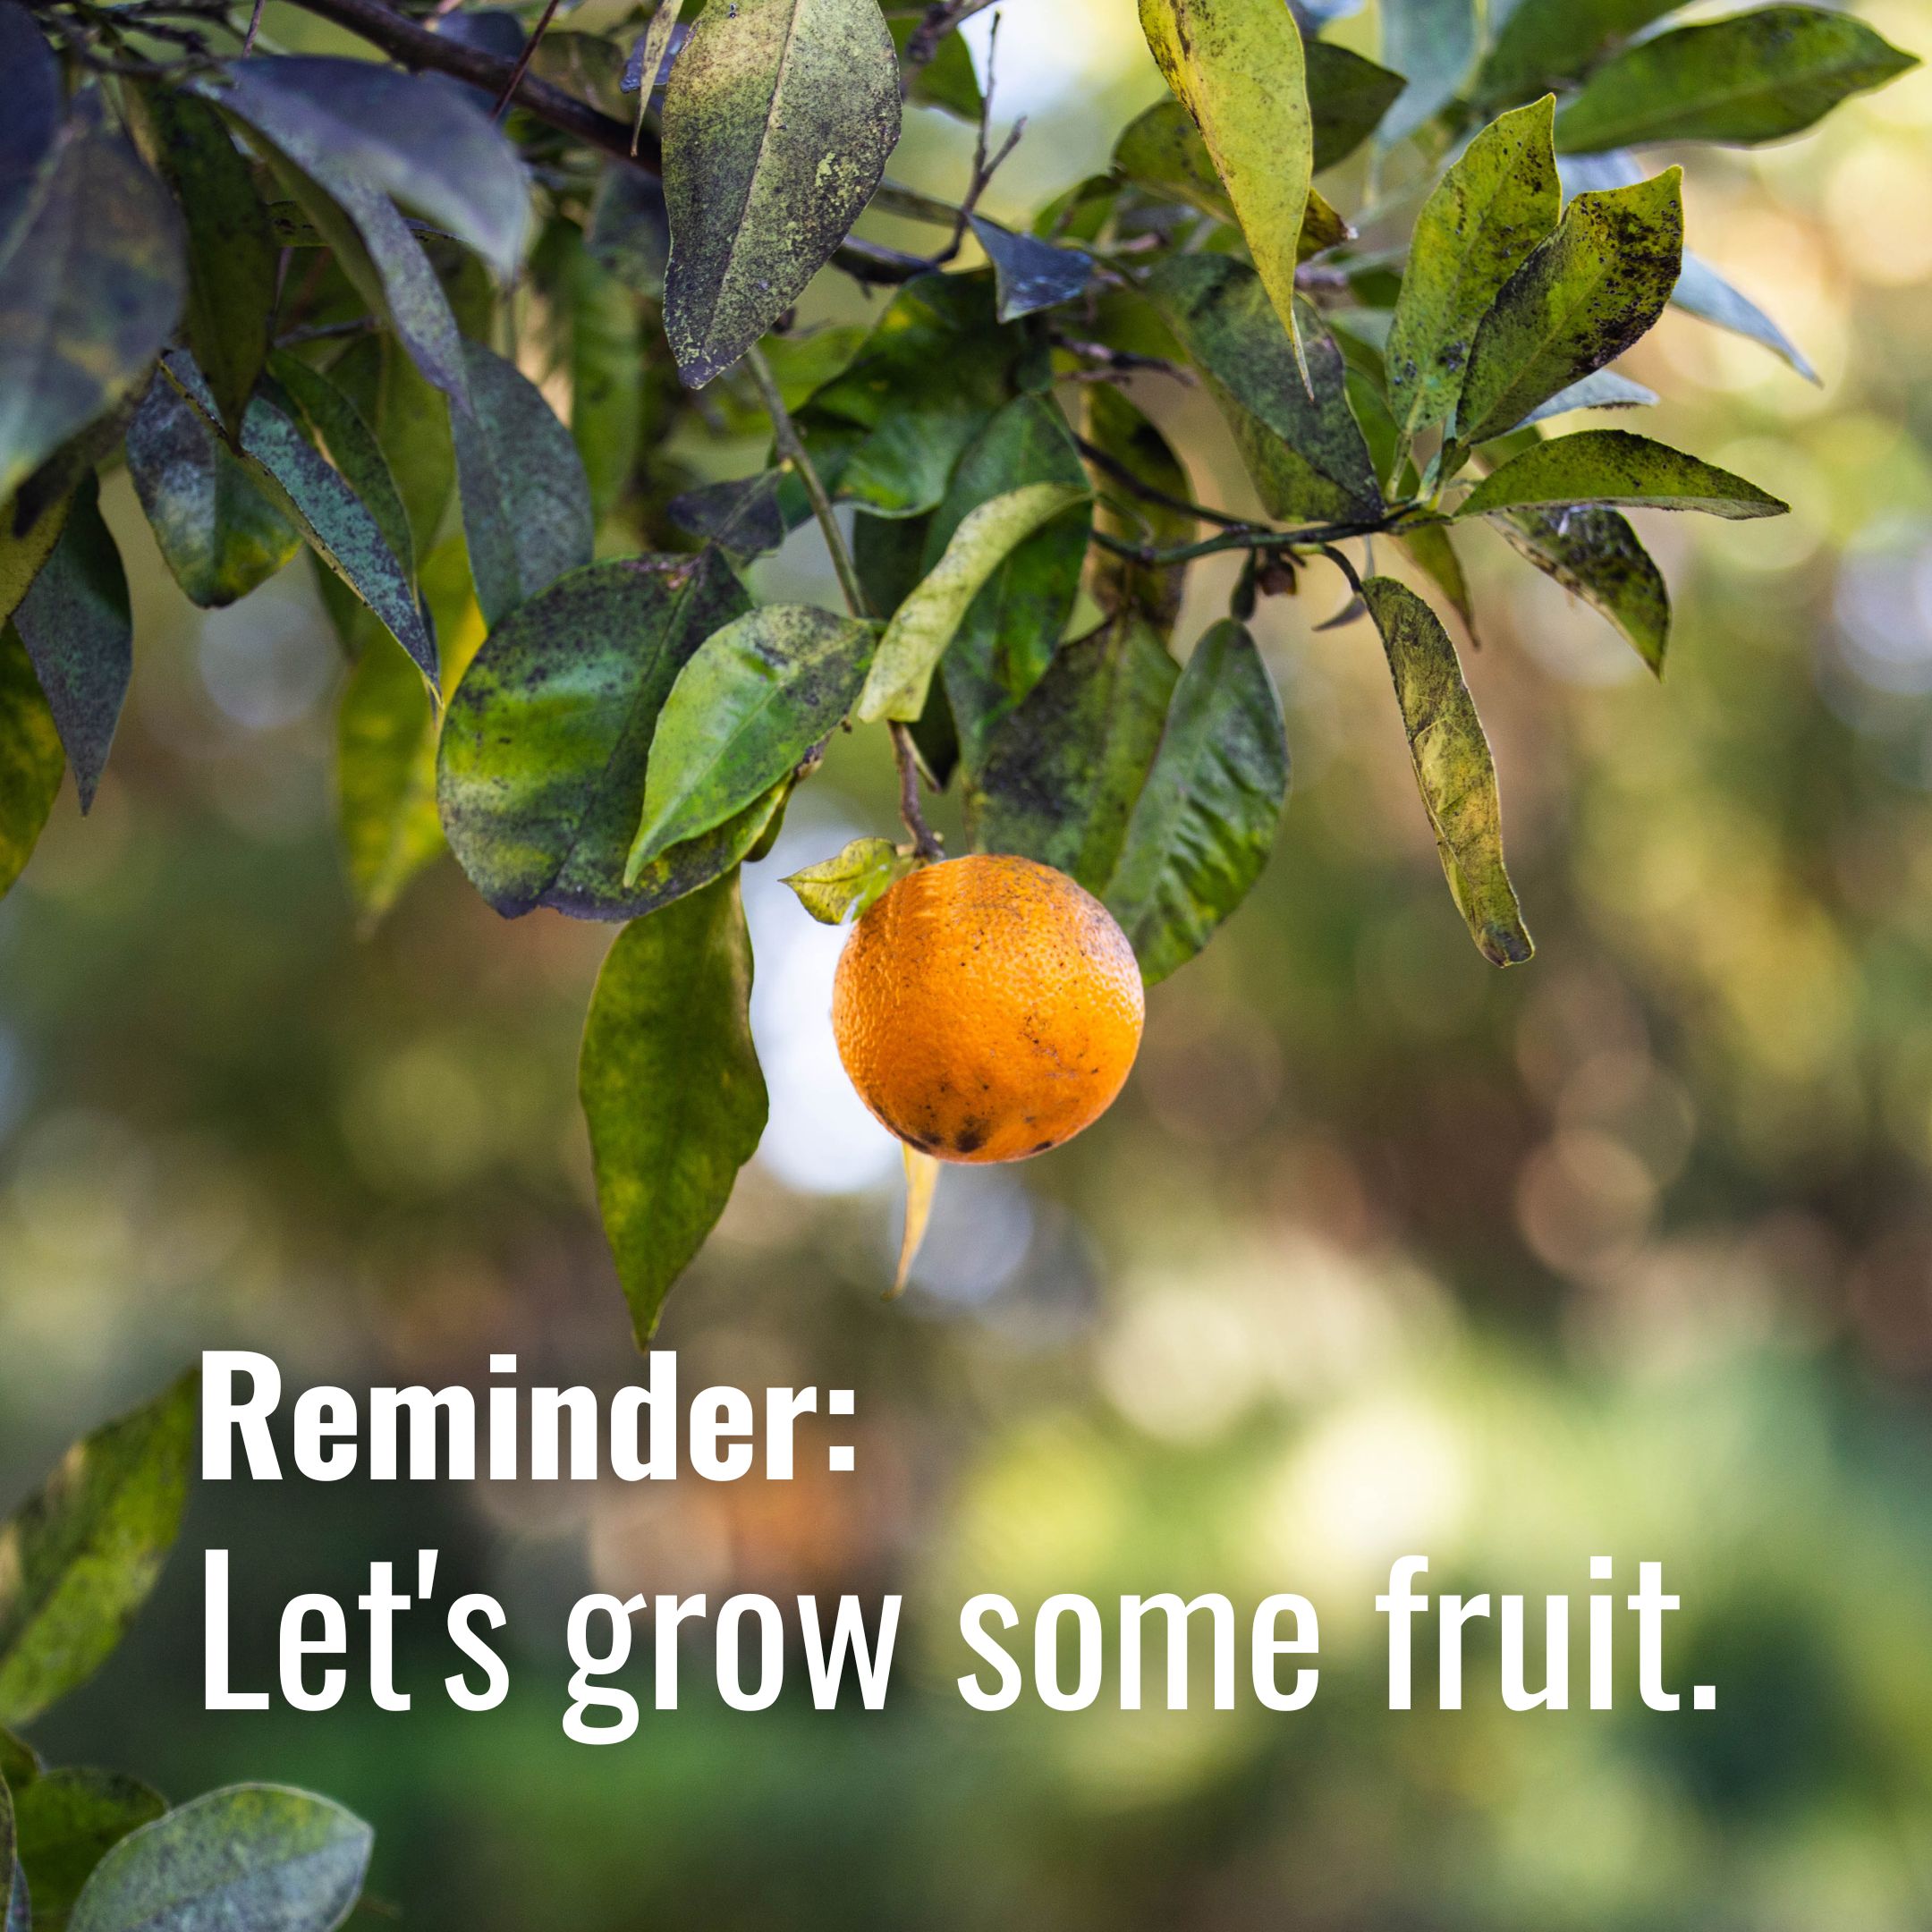 Let's grow some fruit.